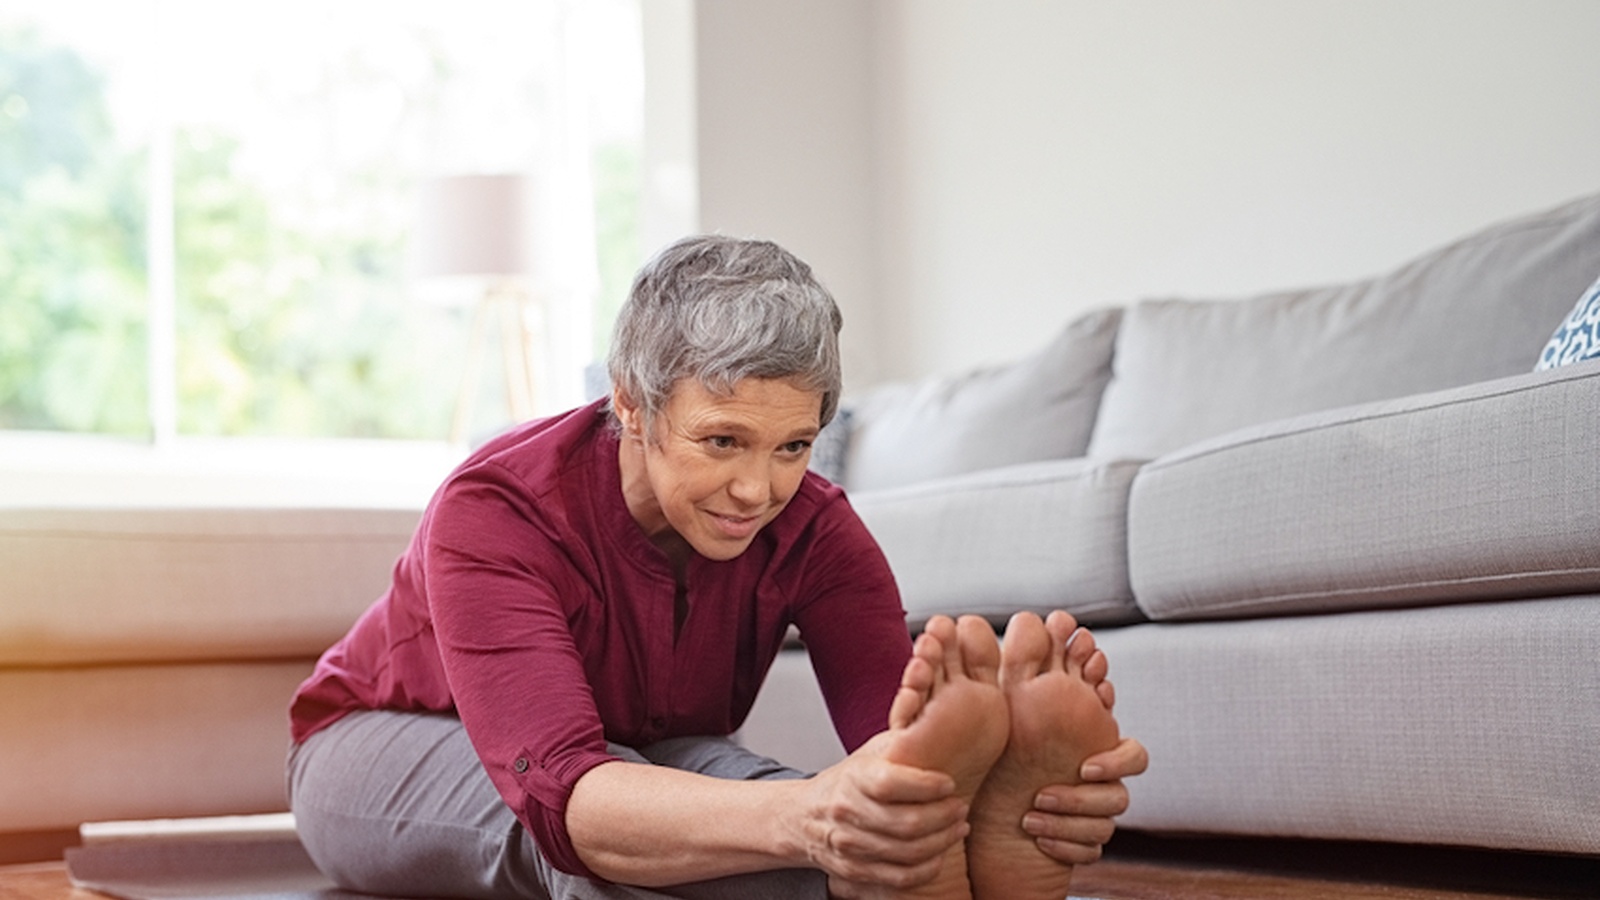 Health Benefits of Stretching More as You Age